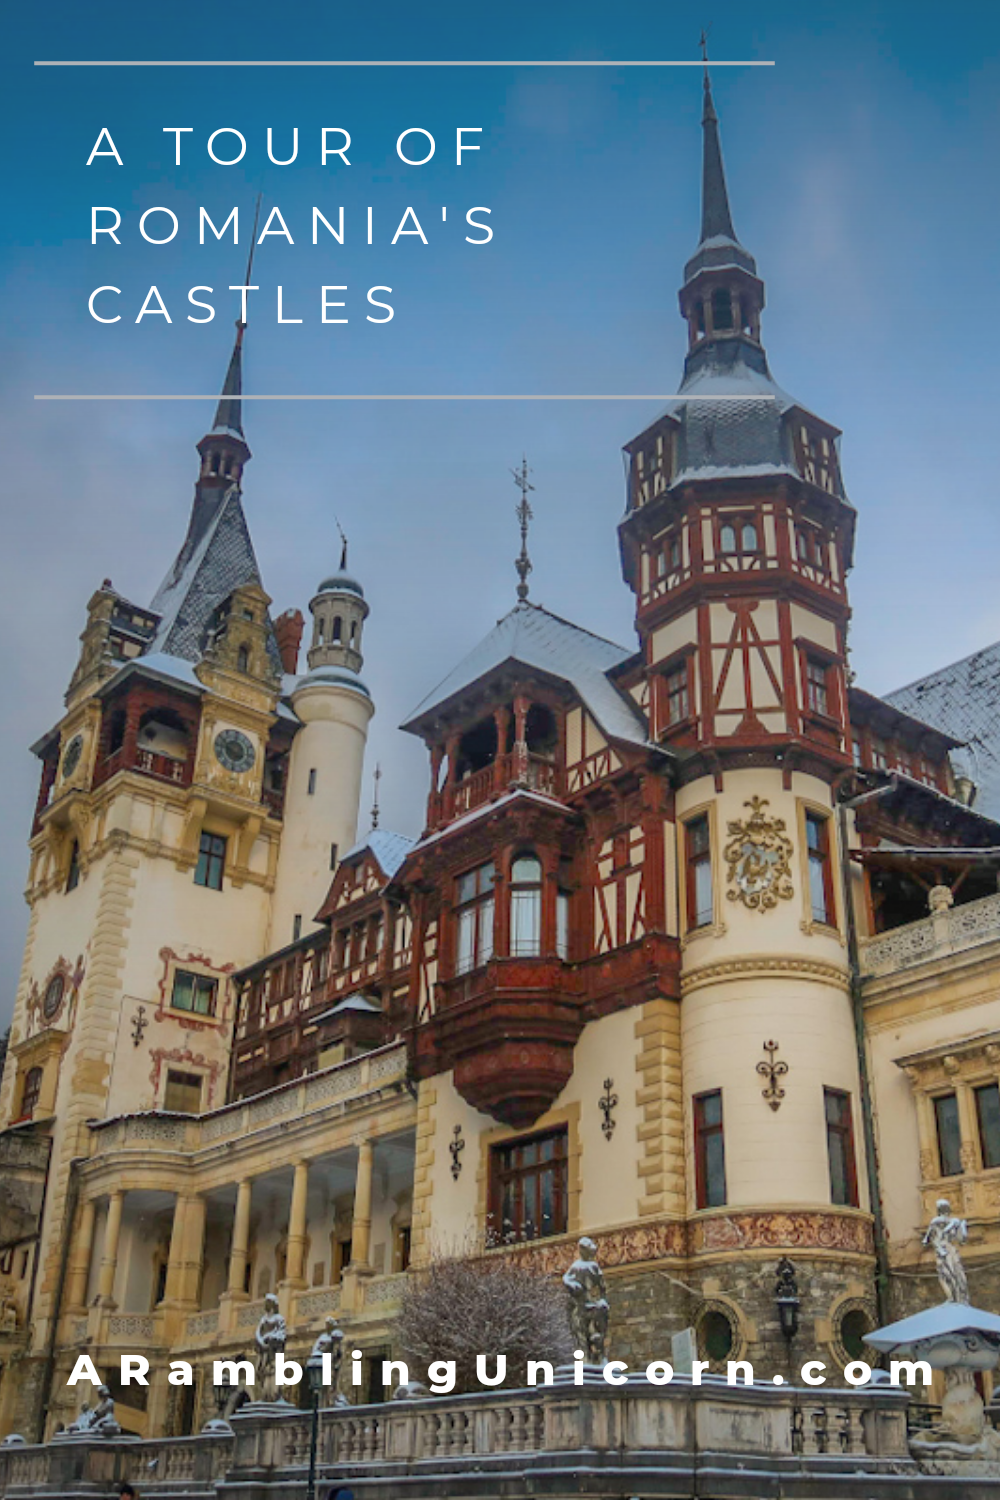 Romania is home to many spectacular castles, including Bran Castle in Transylvania â€“ which has long been associated with Vlad the Impaler (of Bram Stokerâ€™s Dracula fame). PeleÈ™ Castle, used as a filming location for A Christmas Prince, is located about an hourâ€™s drive away in the Carpathian Mountains.